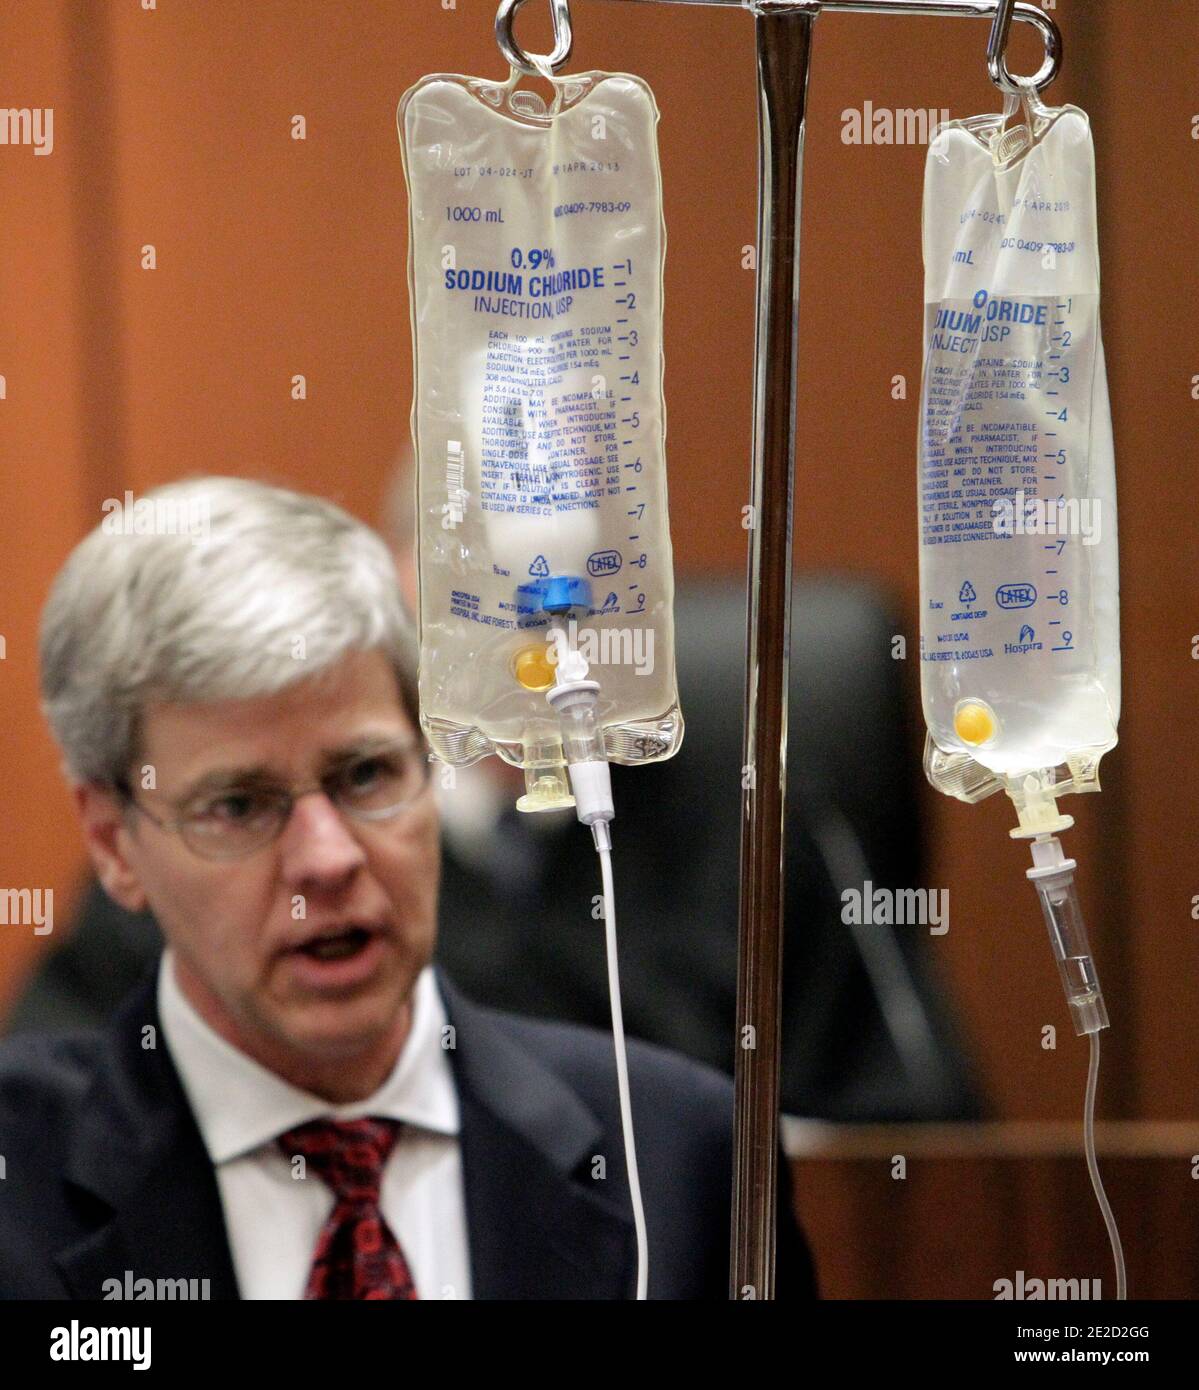 Anesthesiology expert Dr. Steven Shafer, background left, demonstrates the use of propofol while testifying during Dr. Conrad Murray's involuntary manslaughter trial in Los Angeles on October 20, 2011. Murray has pleaded not guilty and faces four years in prison and the loss of his medical license if convicted of involuntary manslaughter in Michael Jackson's death. Photo by Reed Saxon/Pool/ABACAPRESS.COM Stock Photo